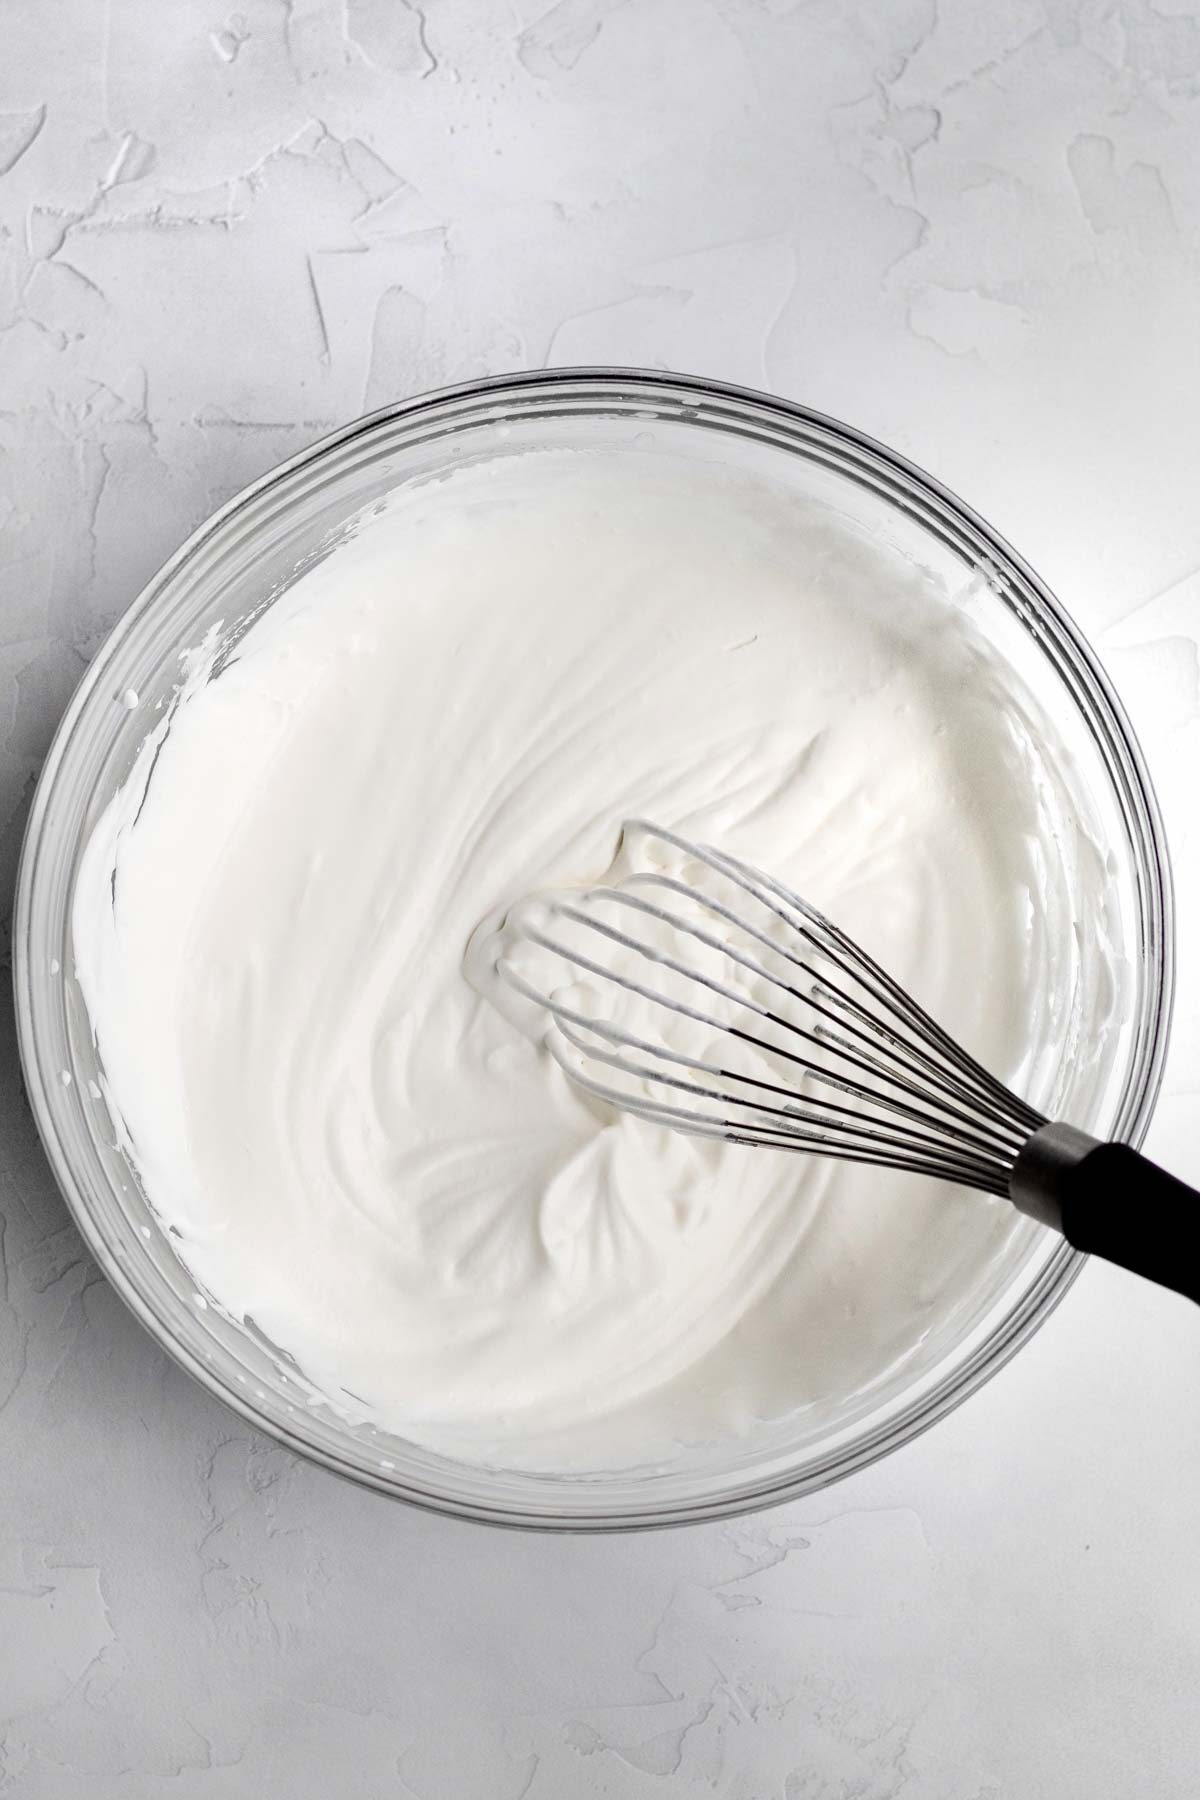 Whipped heavy cream in a bowl.